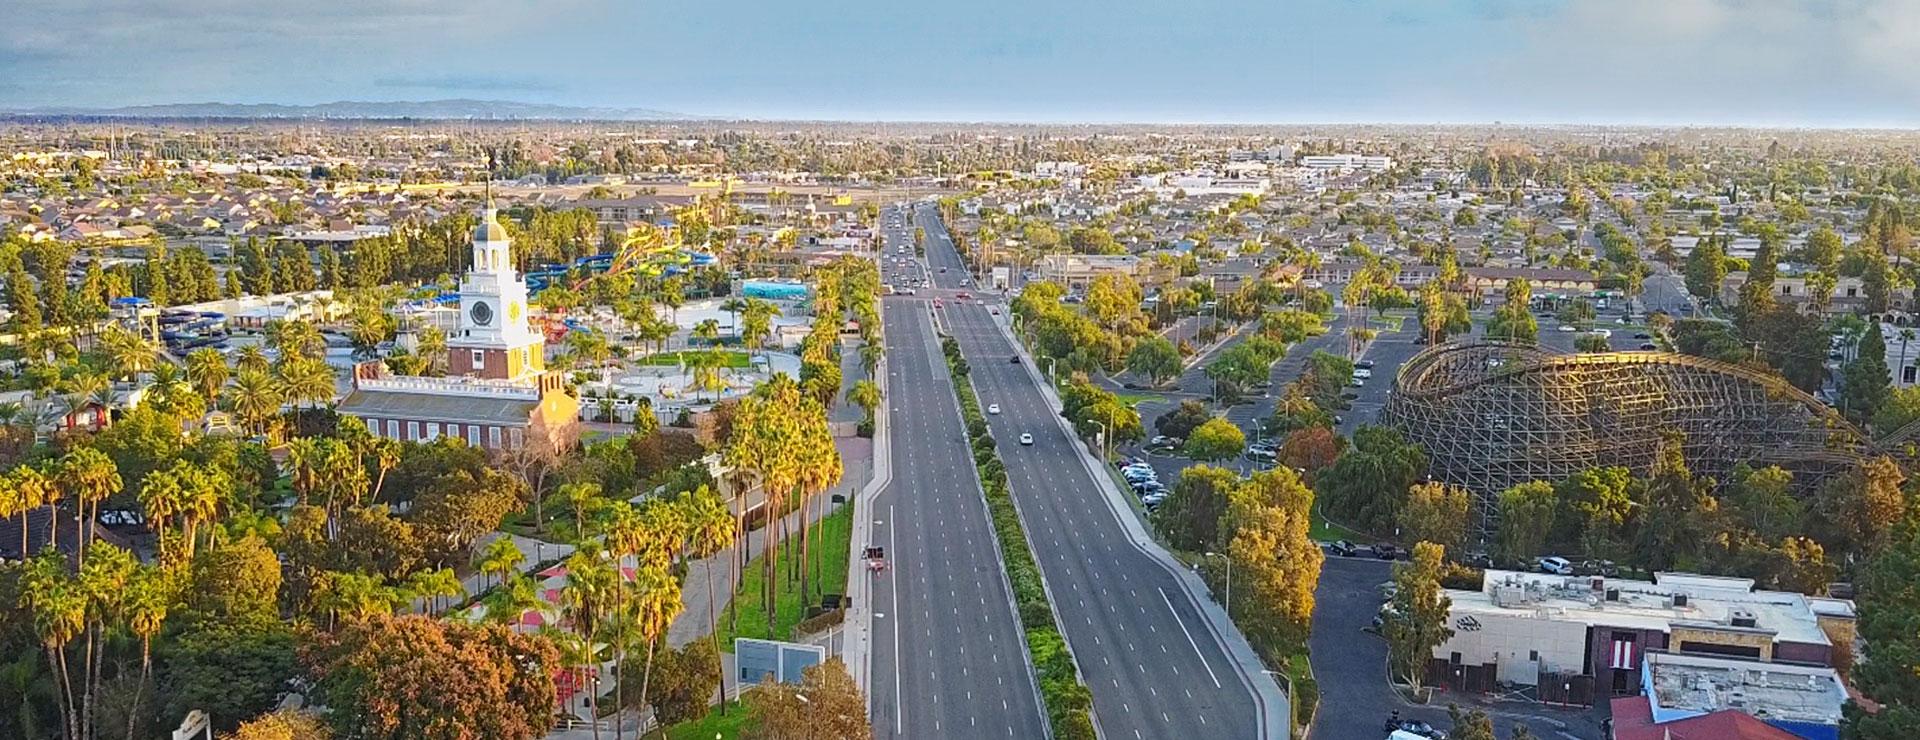 Aerial View of City of Buena Park California